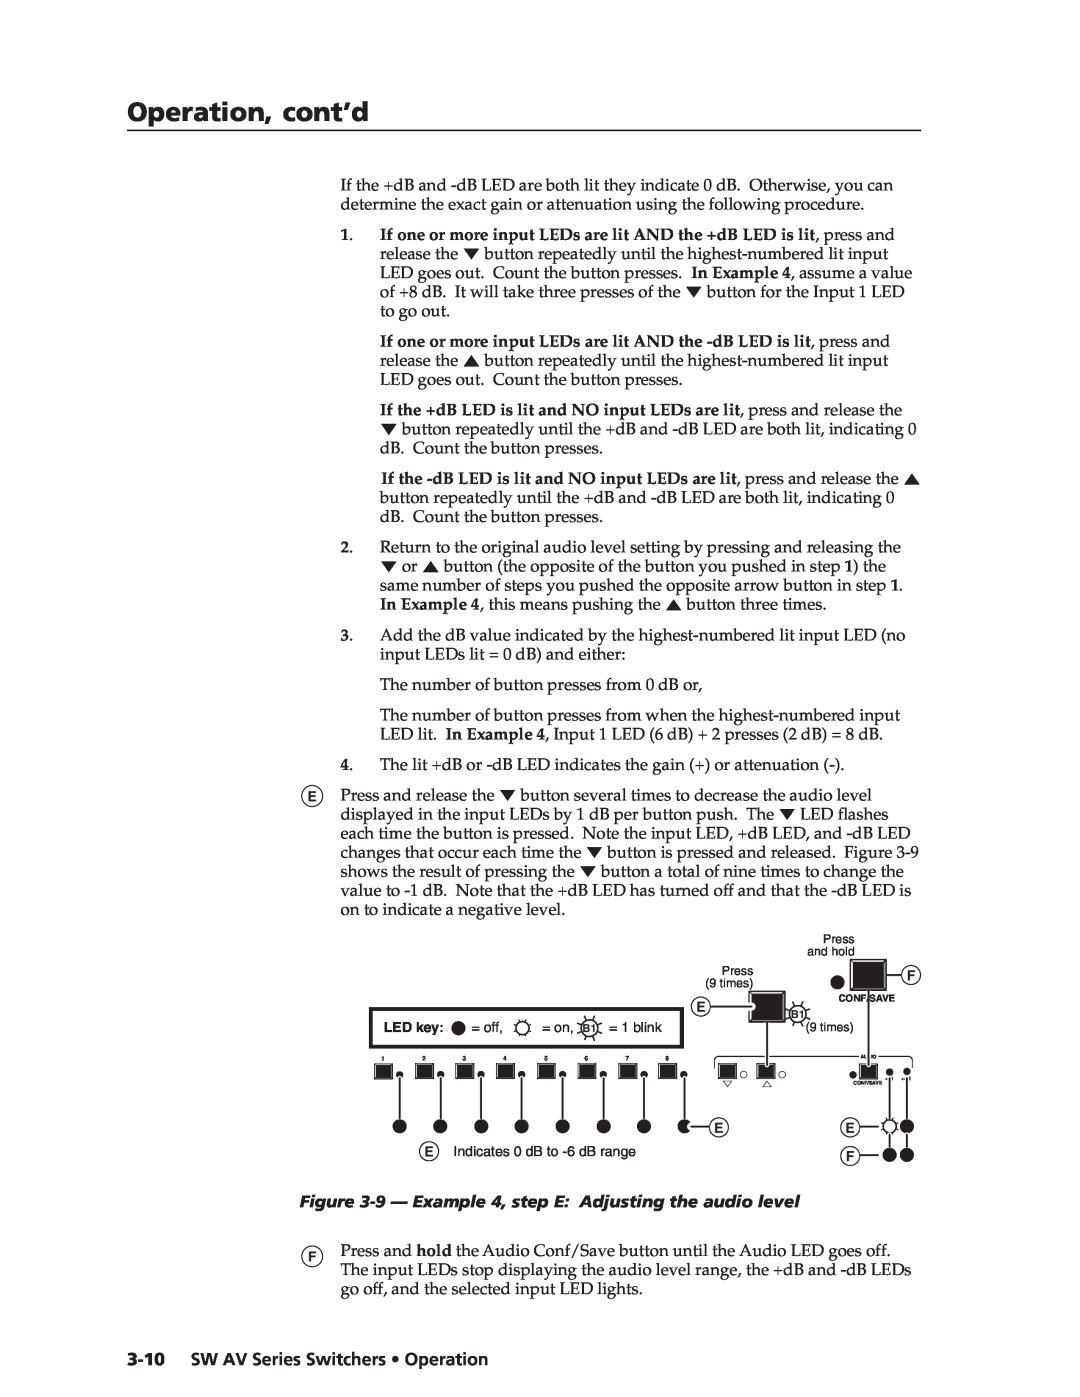 Extron electronic SW AV manual If one or more input LEDs are lit AND the +dB LED is lit , press and, Operation, cont’d 